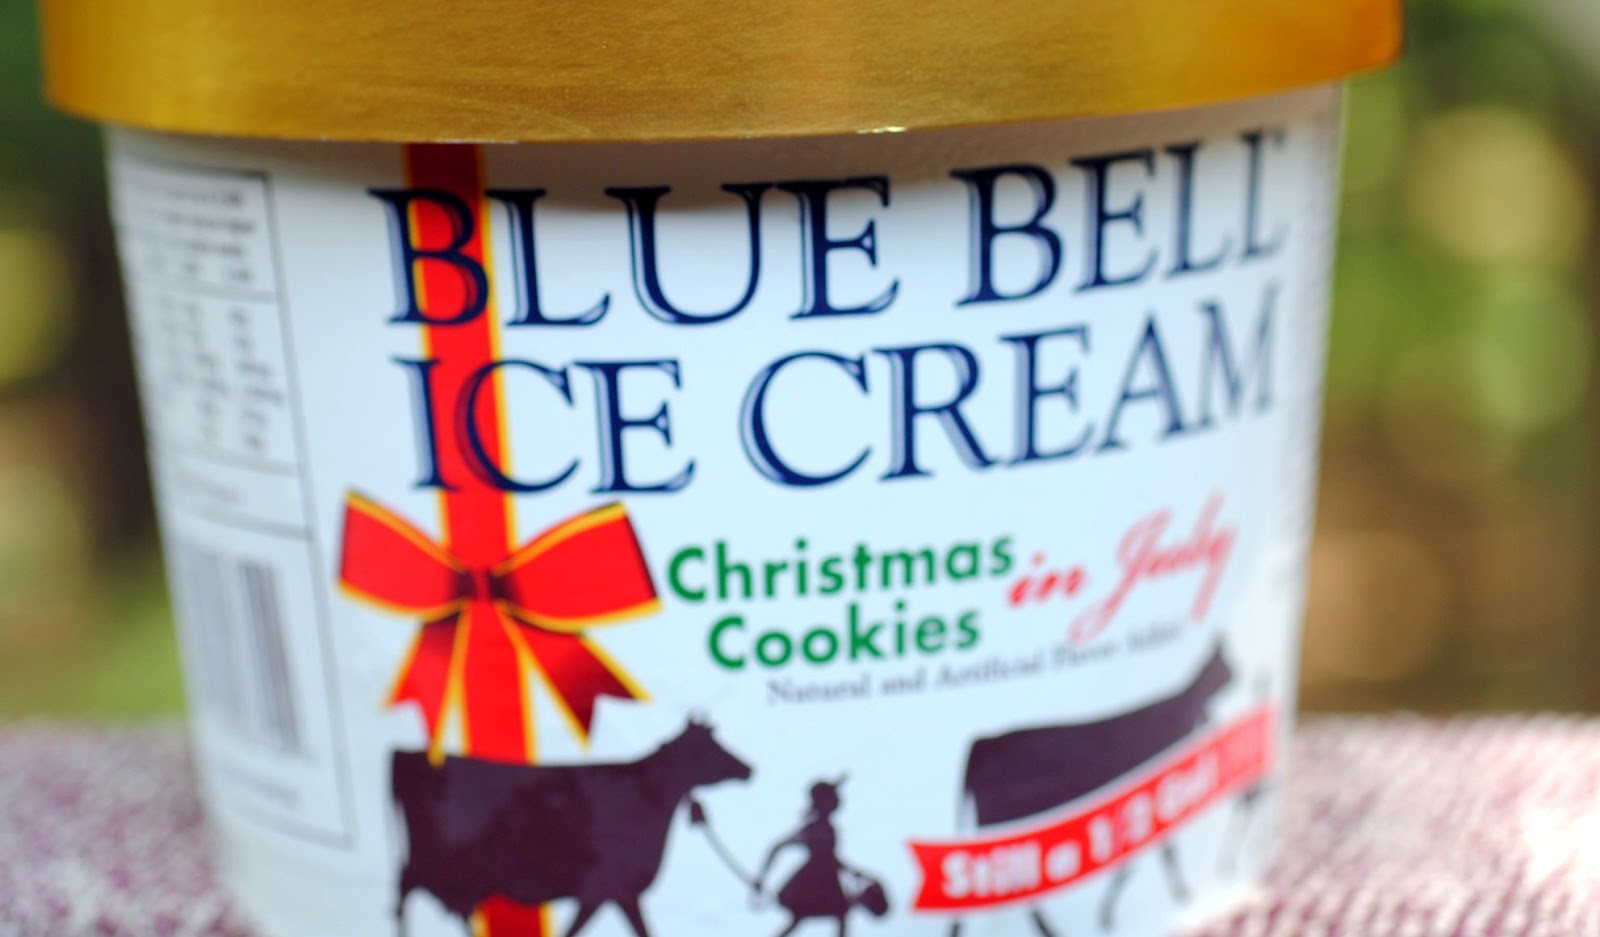 Christmas Cookies Blue Bell
 food and ice cream recipes REVIEW Blue Bell Christmas